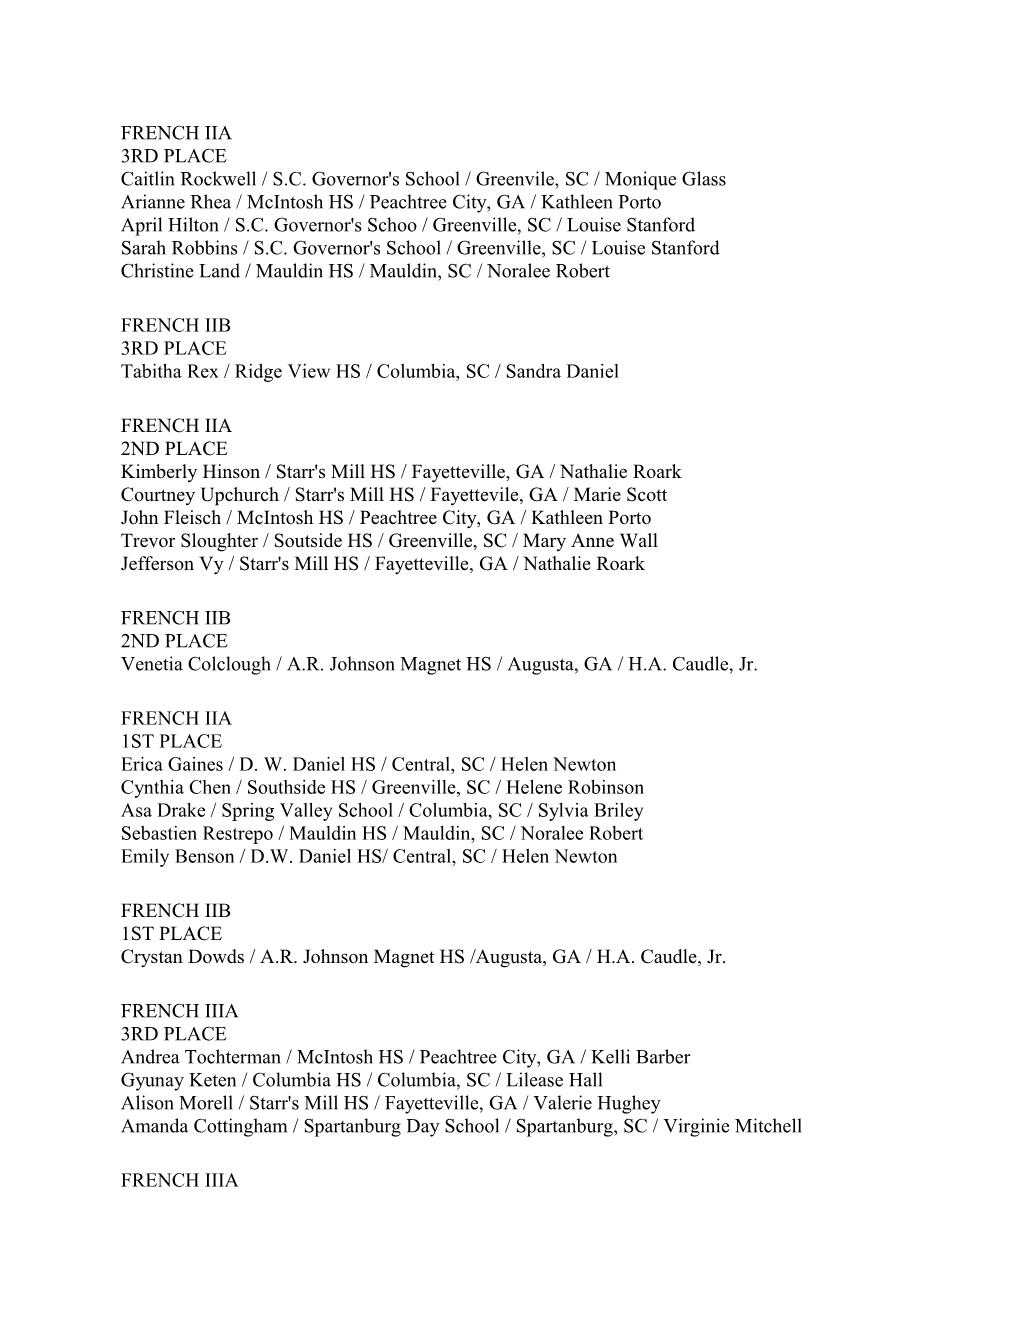 2003 Declamation Results